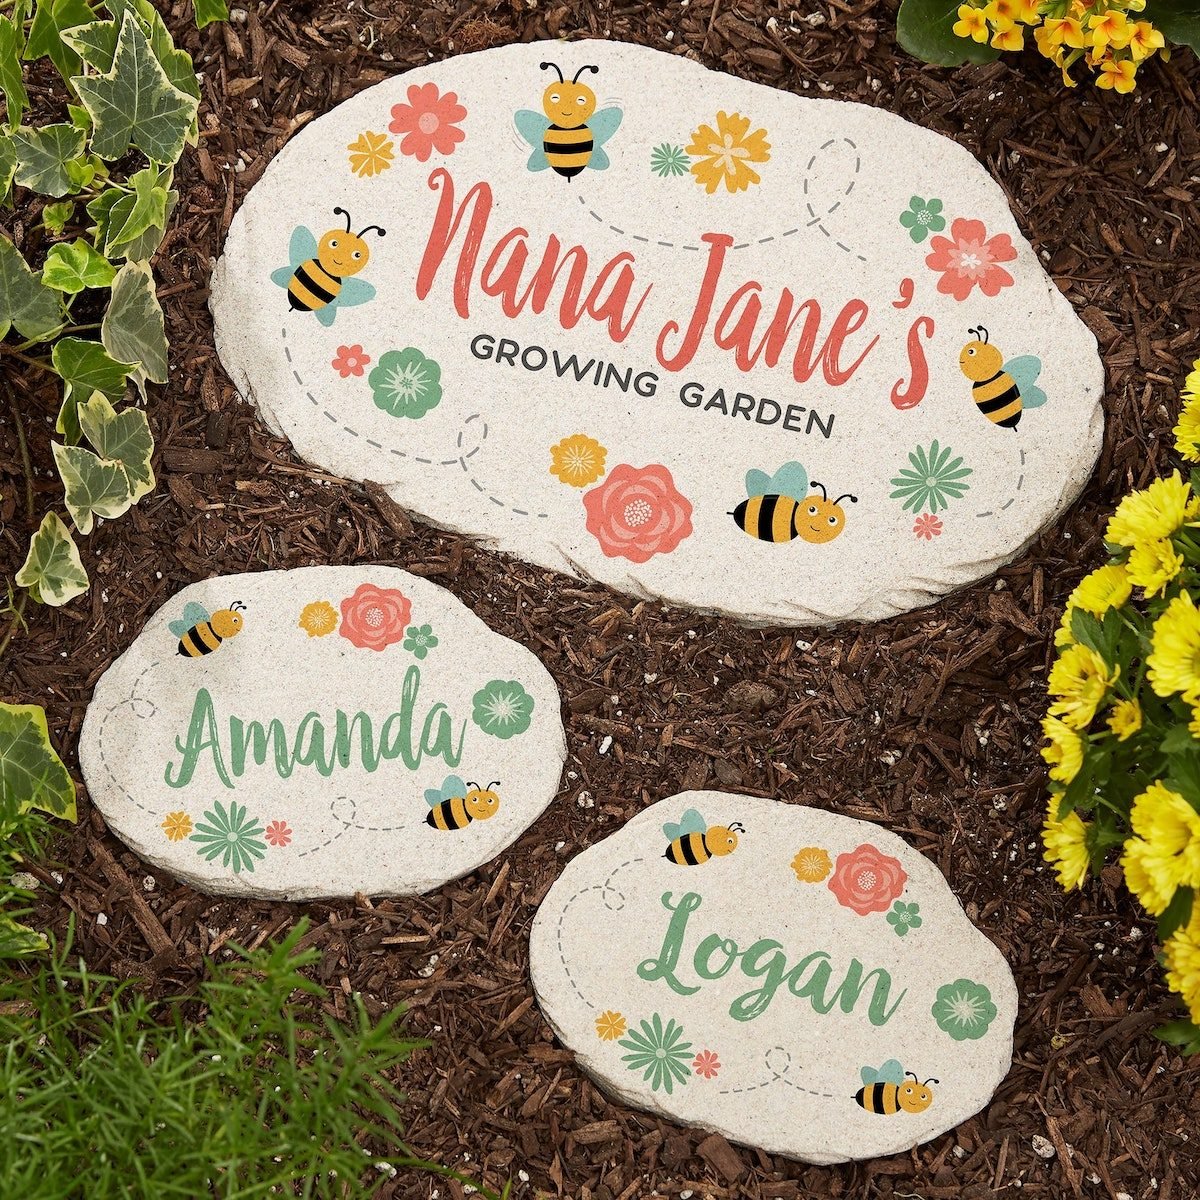 Thank You For Helping Us Bloom - Personalized Birth Flower Mom Garden Stone  - Gardening Gifts For Mom - Personalized Christmas Gifts For Mom - Unique  Personalized Gifts & Home Decor